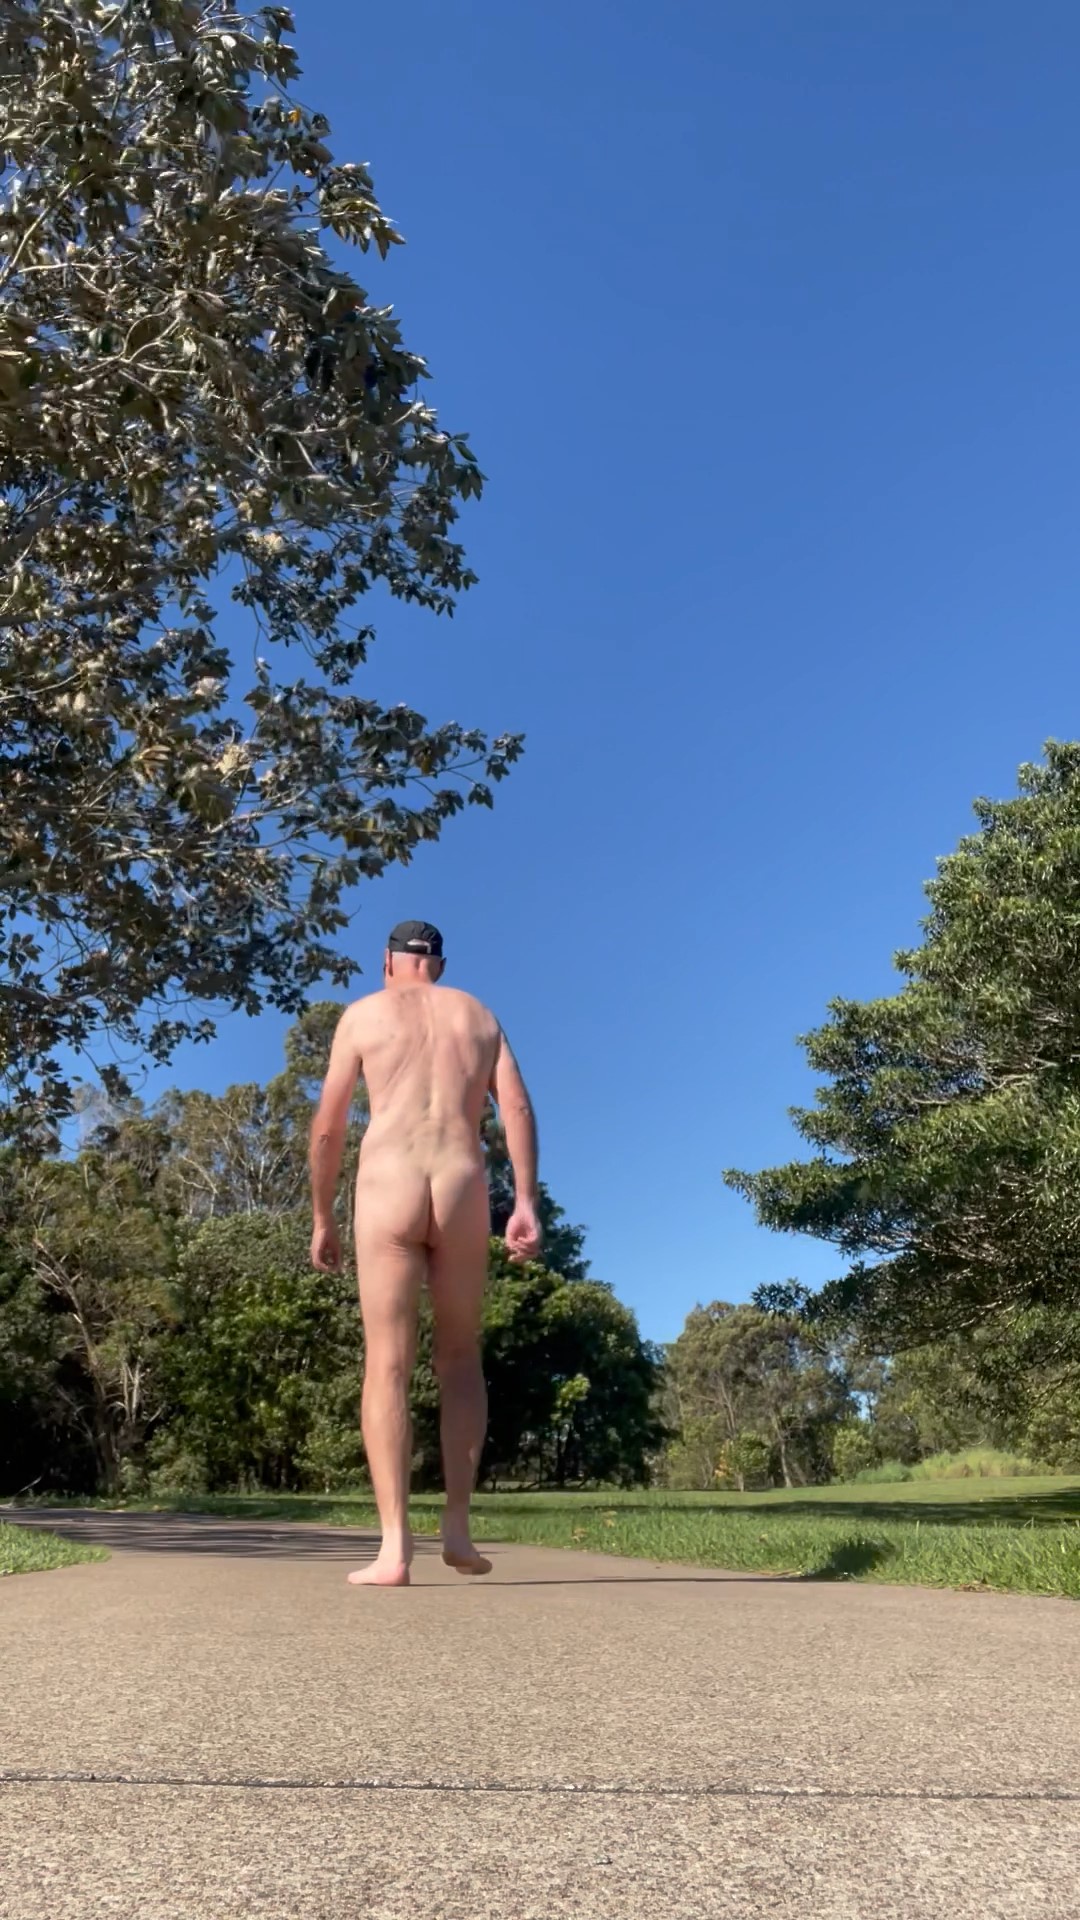 punyc*nt walks nude in a public park in the middle of the day